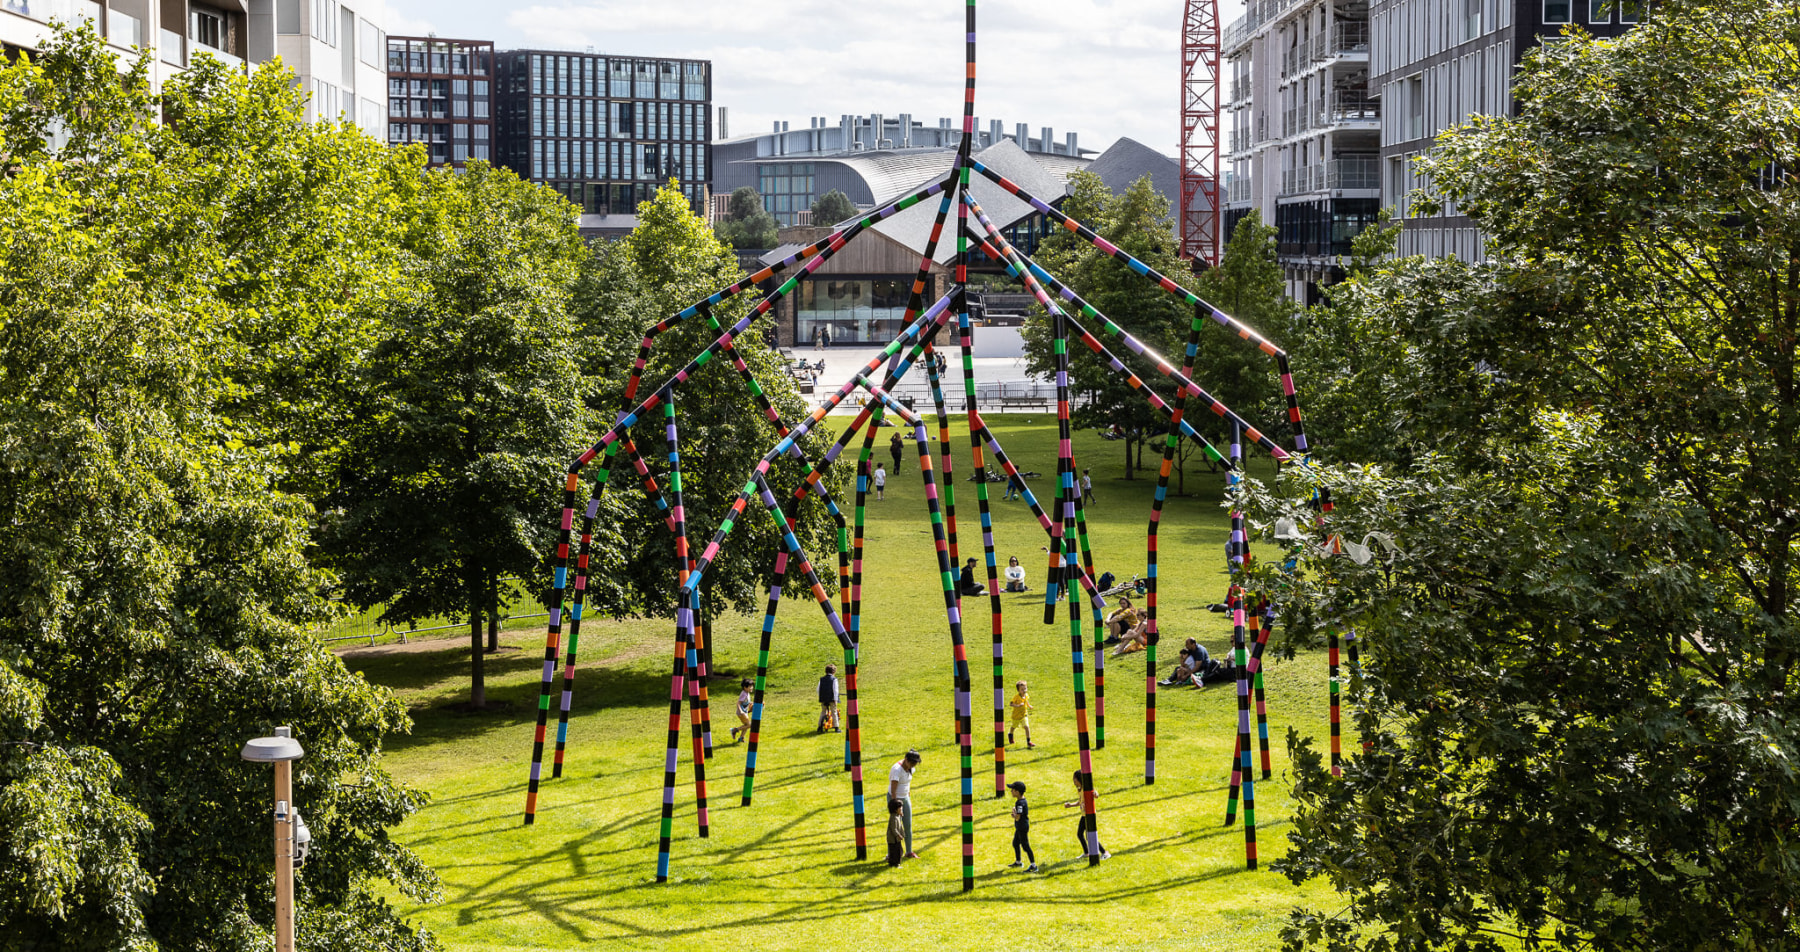 Eva Rothschild

My World and Your World

2020

painted steel, zinc and polyester

52 ft 5 inches x 39 ft 2 inches x 38 ft 9 inches (1597.6 x 1193.4 x 1180.6 cm)

ER 253

Commissioned by The King&amp;rsquo;s Cross Project. Located at Lewis Cubitt Park in King&amp;rsquo;s Cross, London.&amp;nbsp;

Photo: John Sturrock

&amp;nbsp;